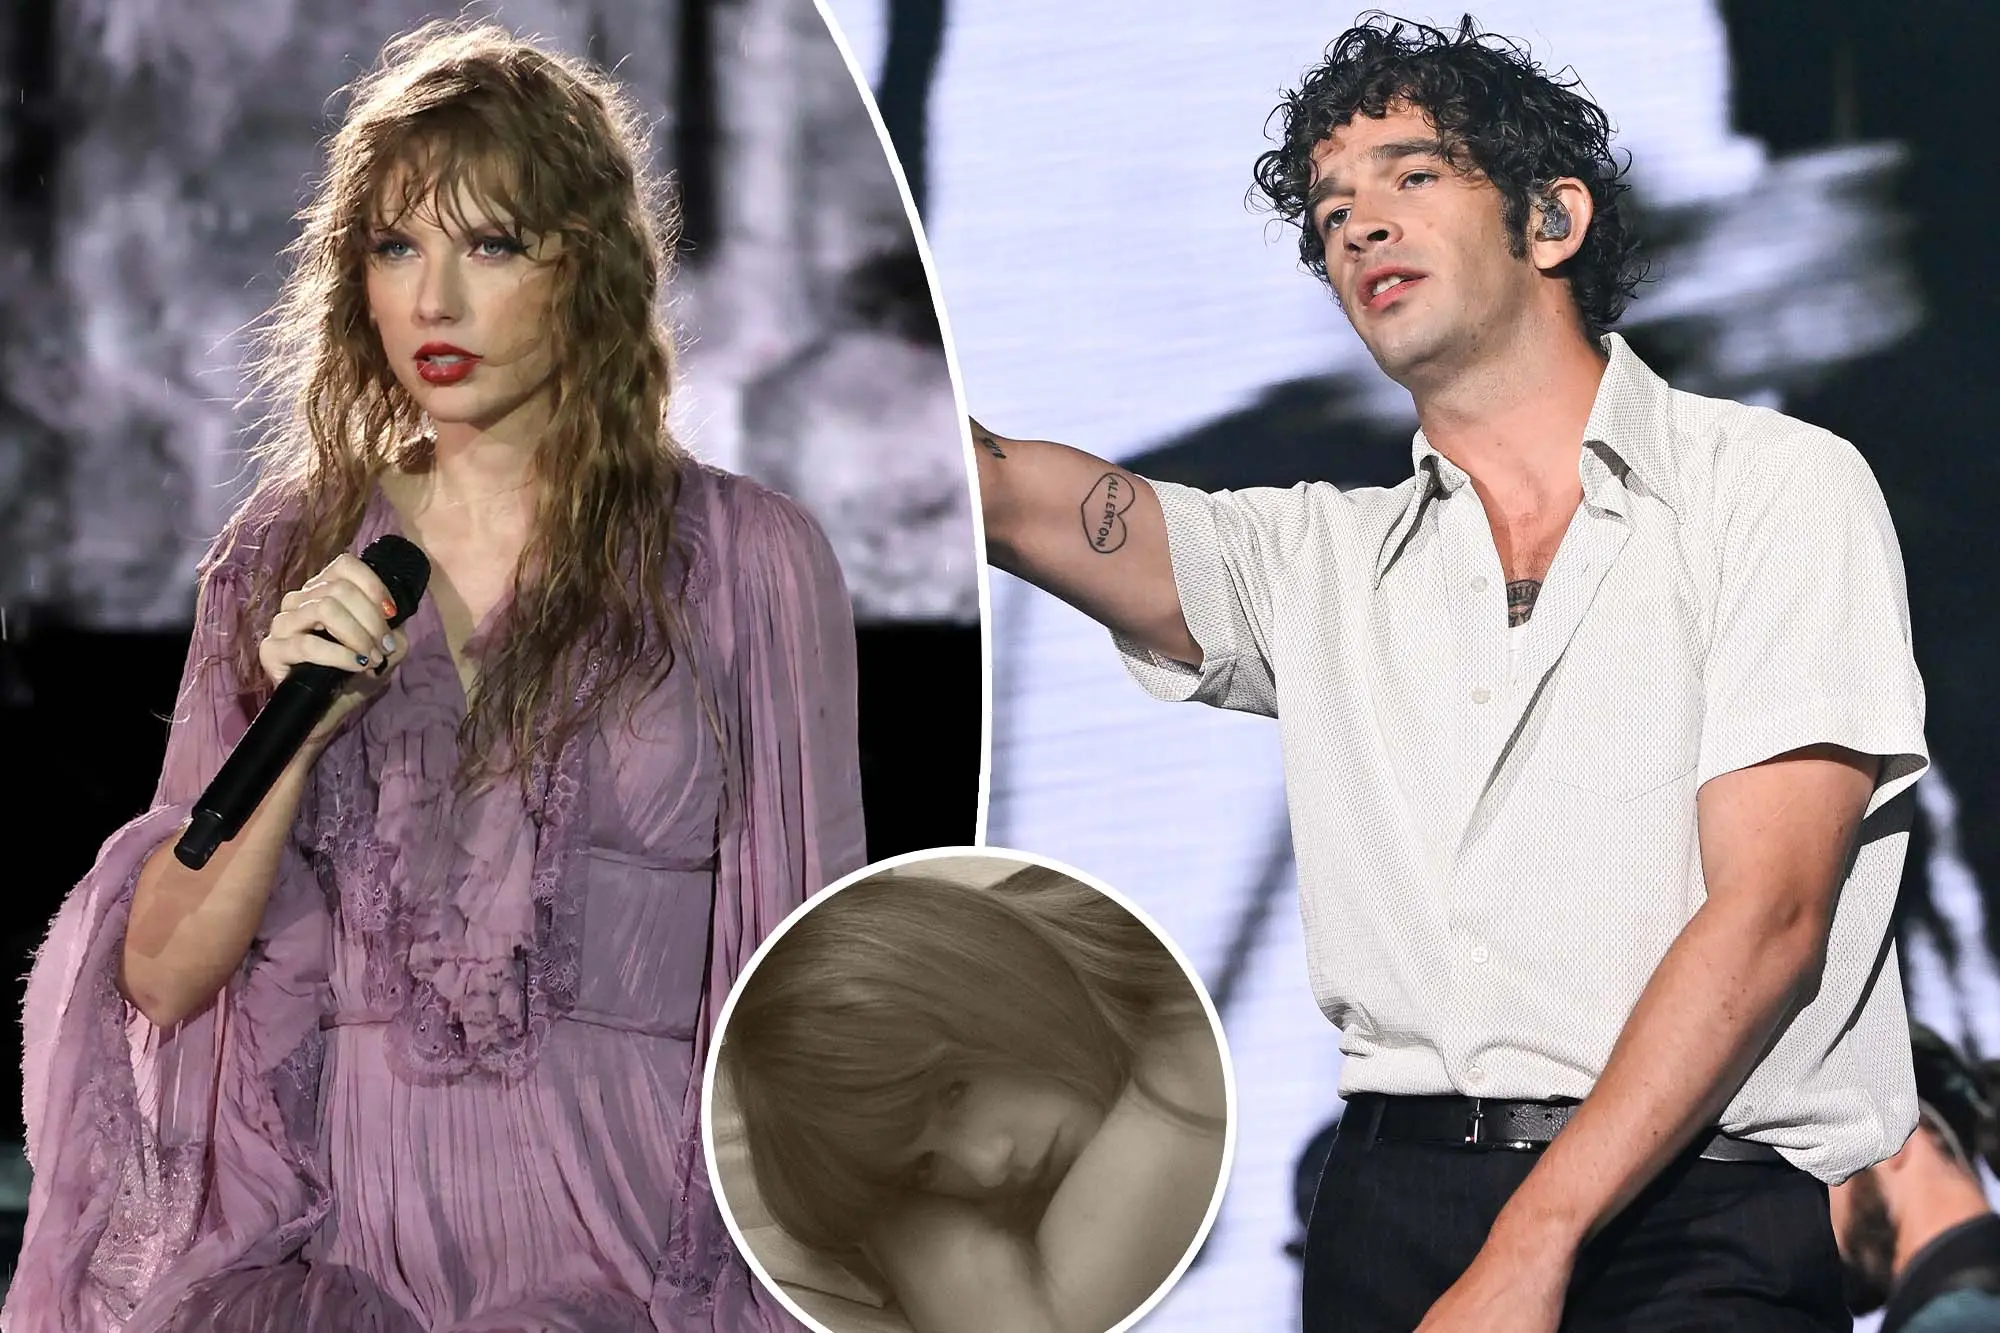 Why a ‘situationship’ like Taylor Swift’s with Matty Healy is so heartbreaking: dating experts